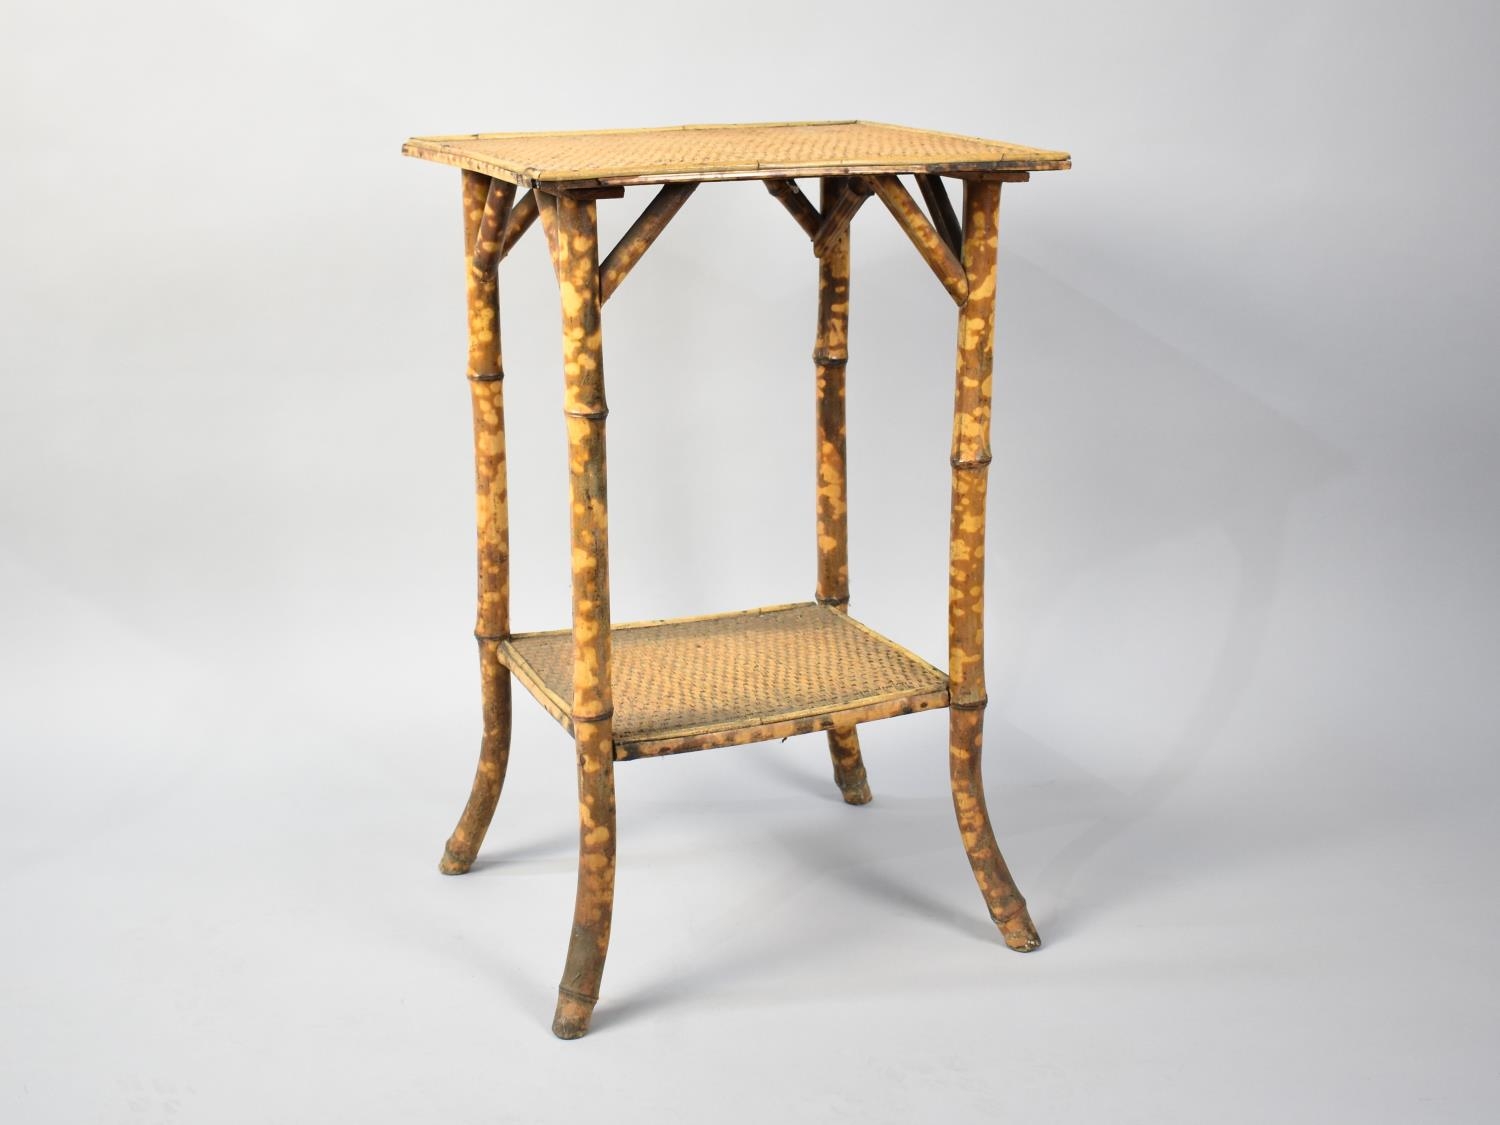 A Bamboo Framed Occasional Table with Stretcher Shelf, 46x37x71cms High